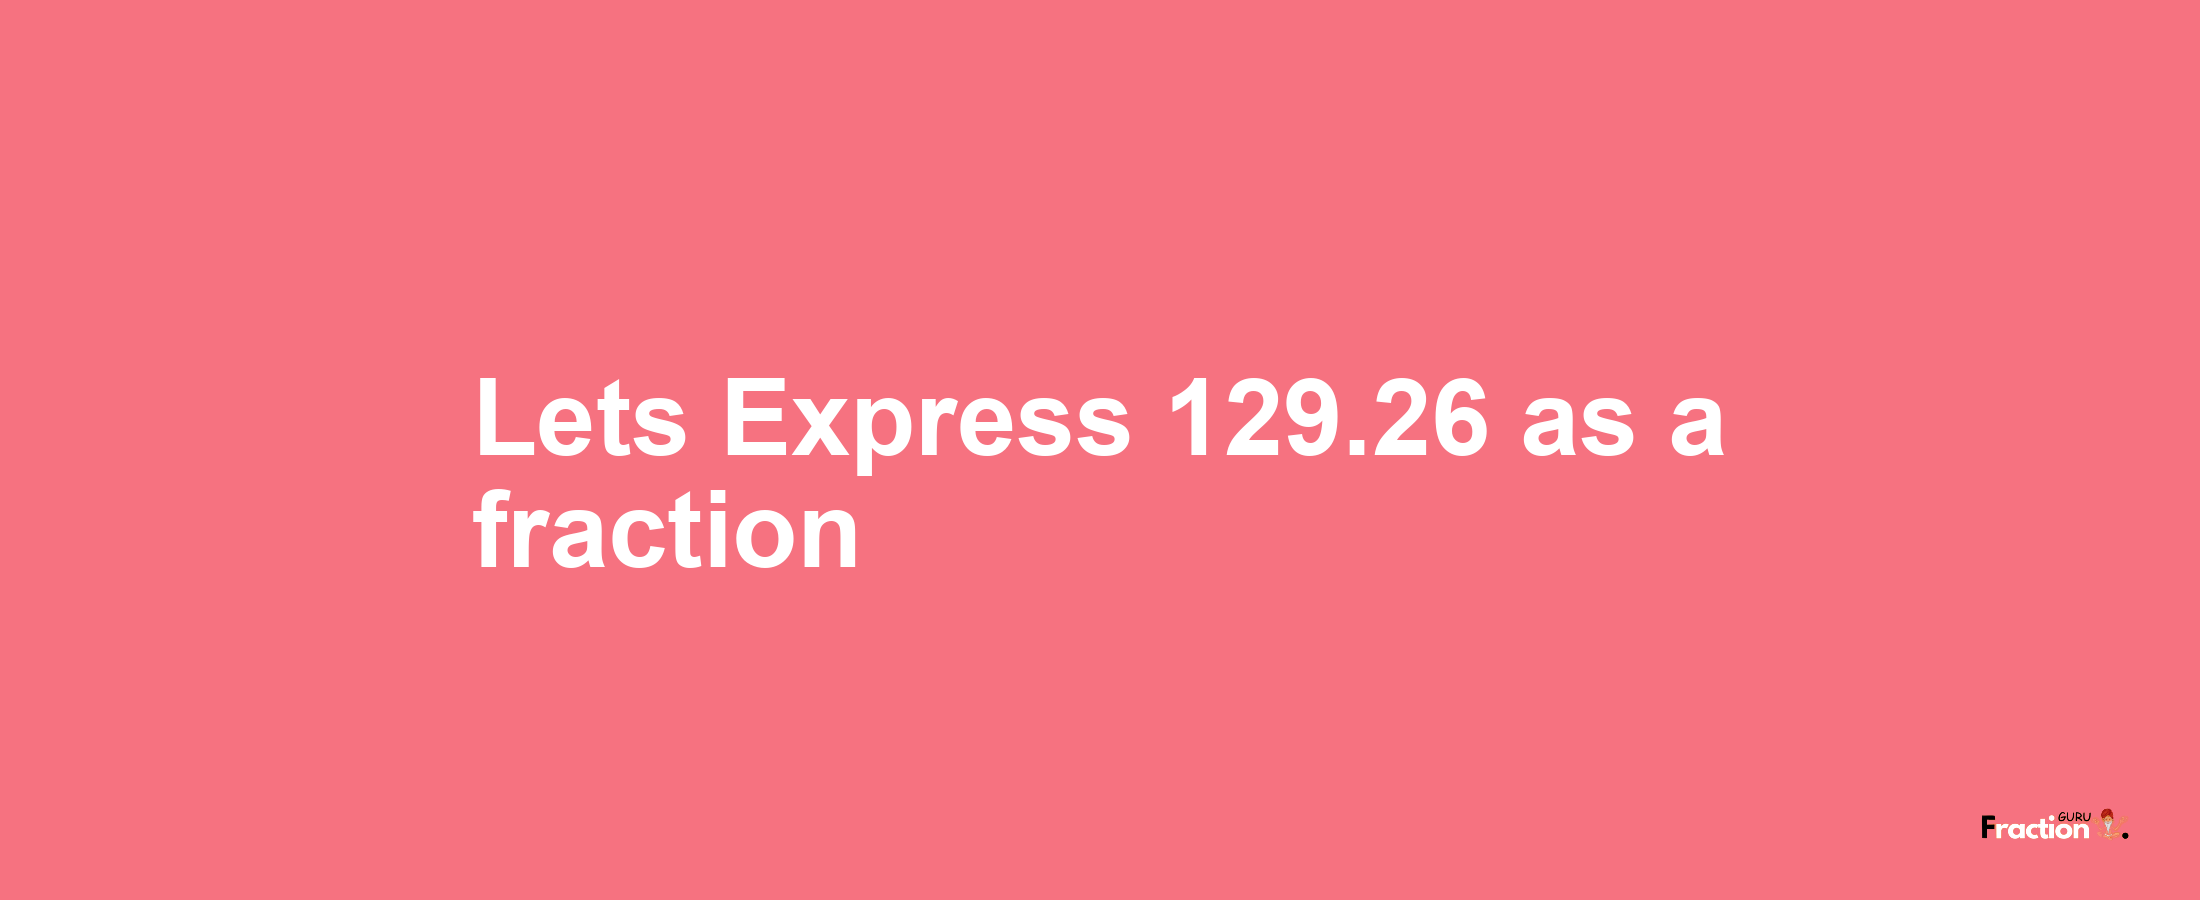 Lets Express 129.26 as afraction